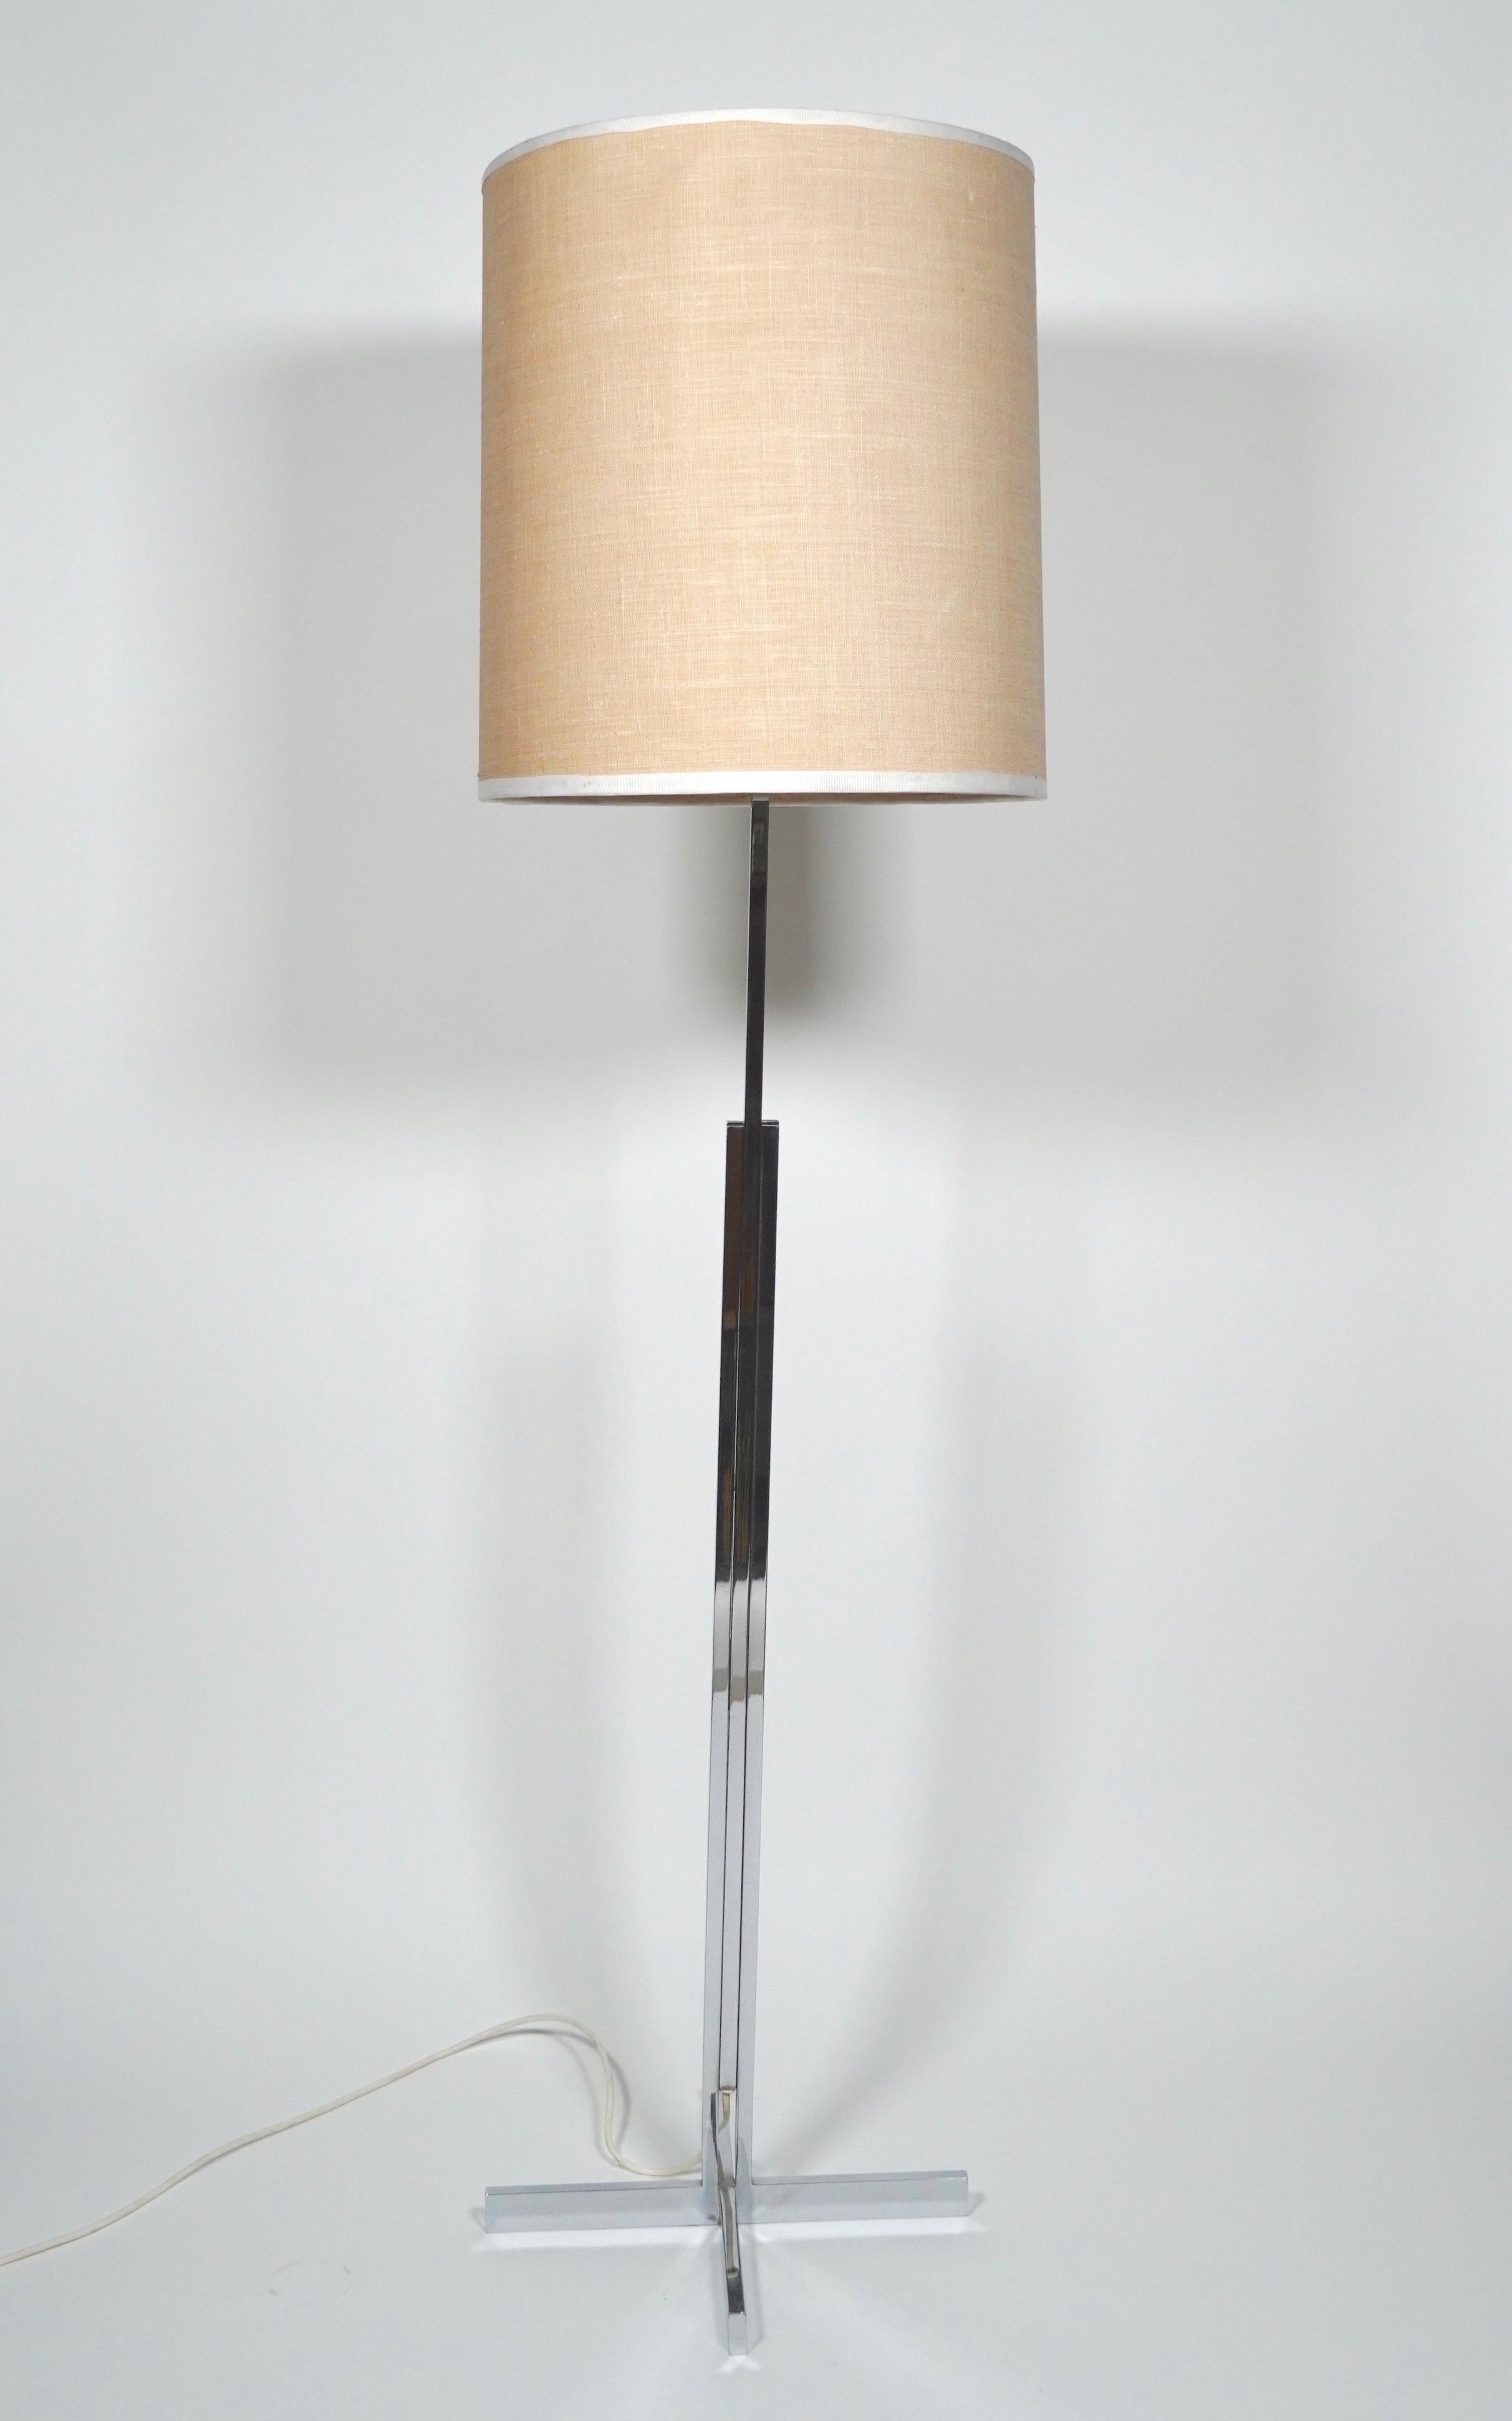 International Style chrome and linen floor lamp circa 1960s from Switzerland. Consisting of a three part square tubing chrome frame resting on a four point rectangular base creating a slender profile. The lighting mechanism is a three way light